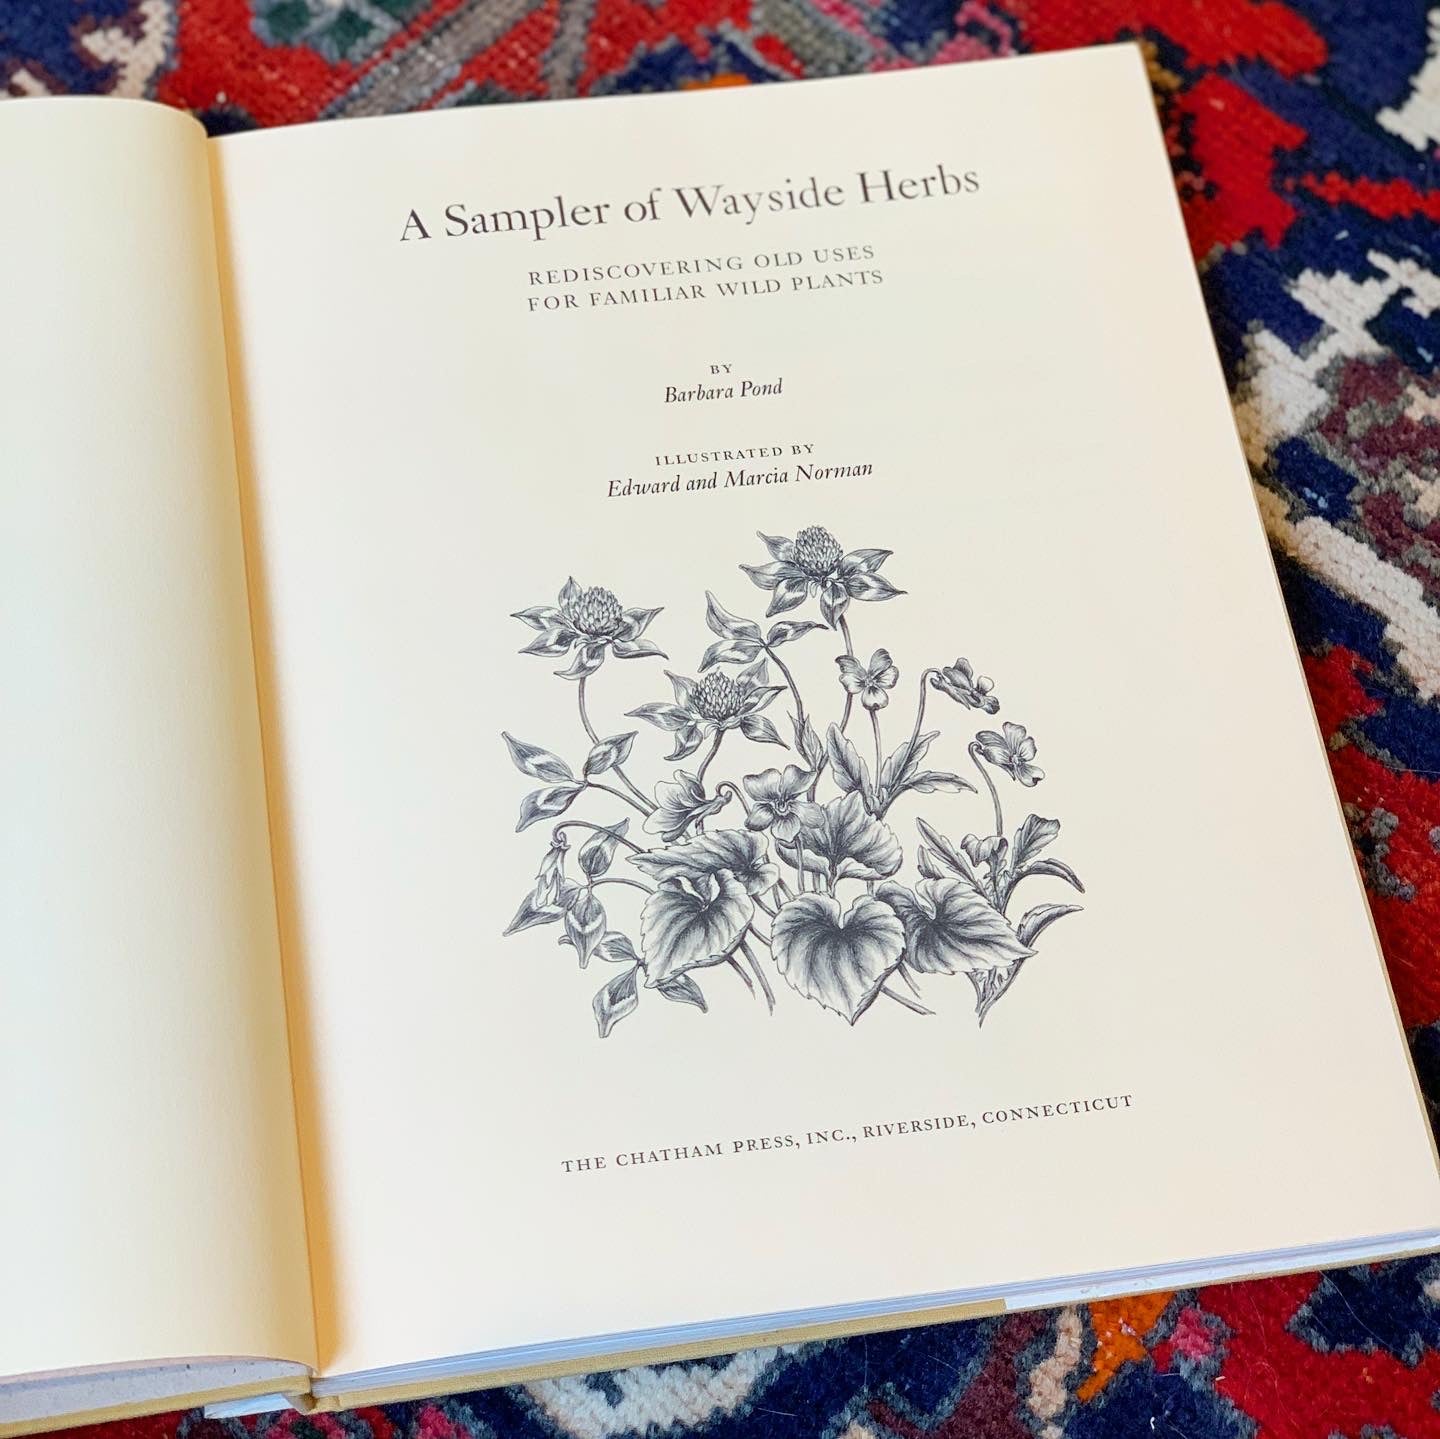 A Sampler of Wayside Herbs (First Edition, 1974)